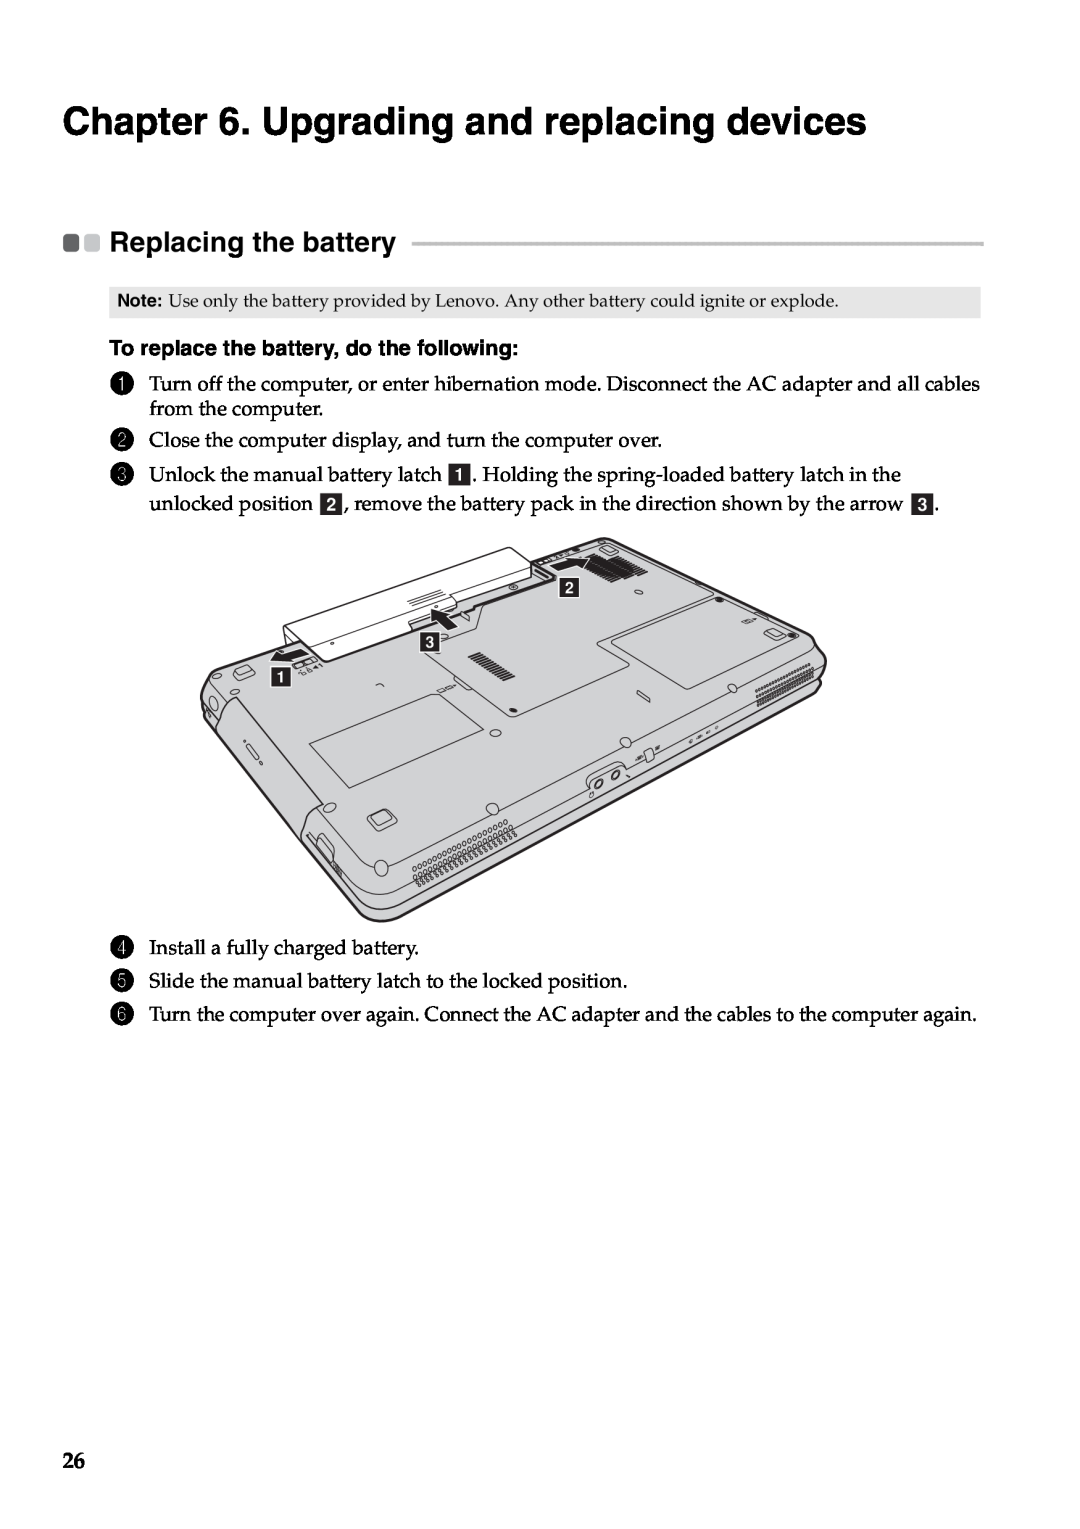 Lenovo 57323748, B550 Upgrading and replacing devices, Replacing the battery, To replace the battery, do the following 